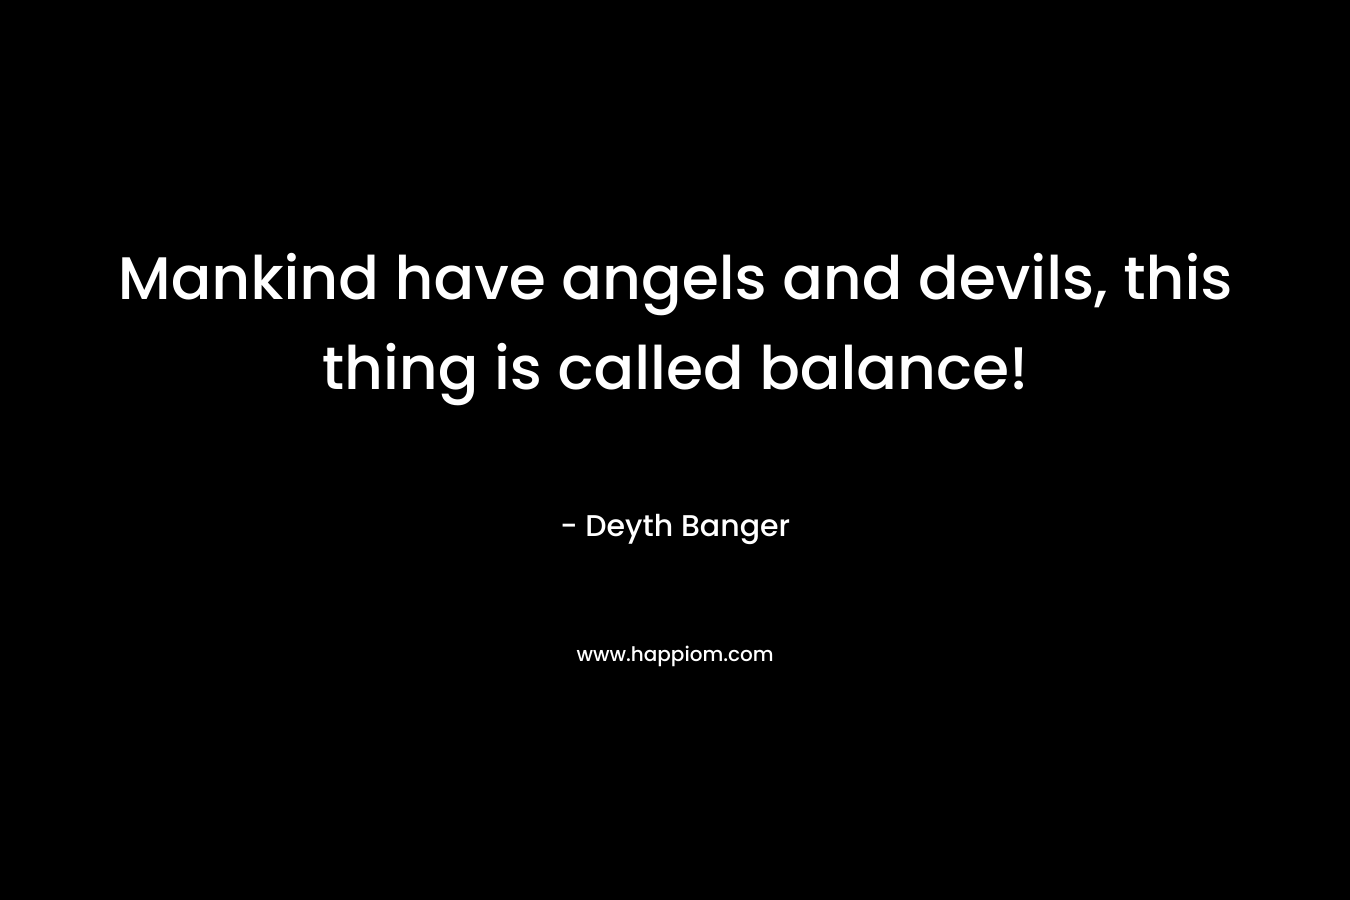 Mankind have angels and devils, this thing is called balance! – Deyth Banger